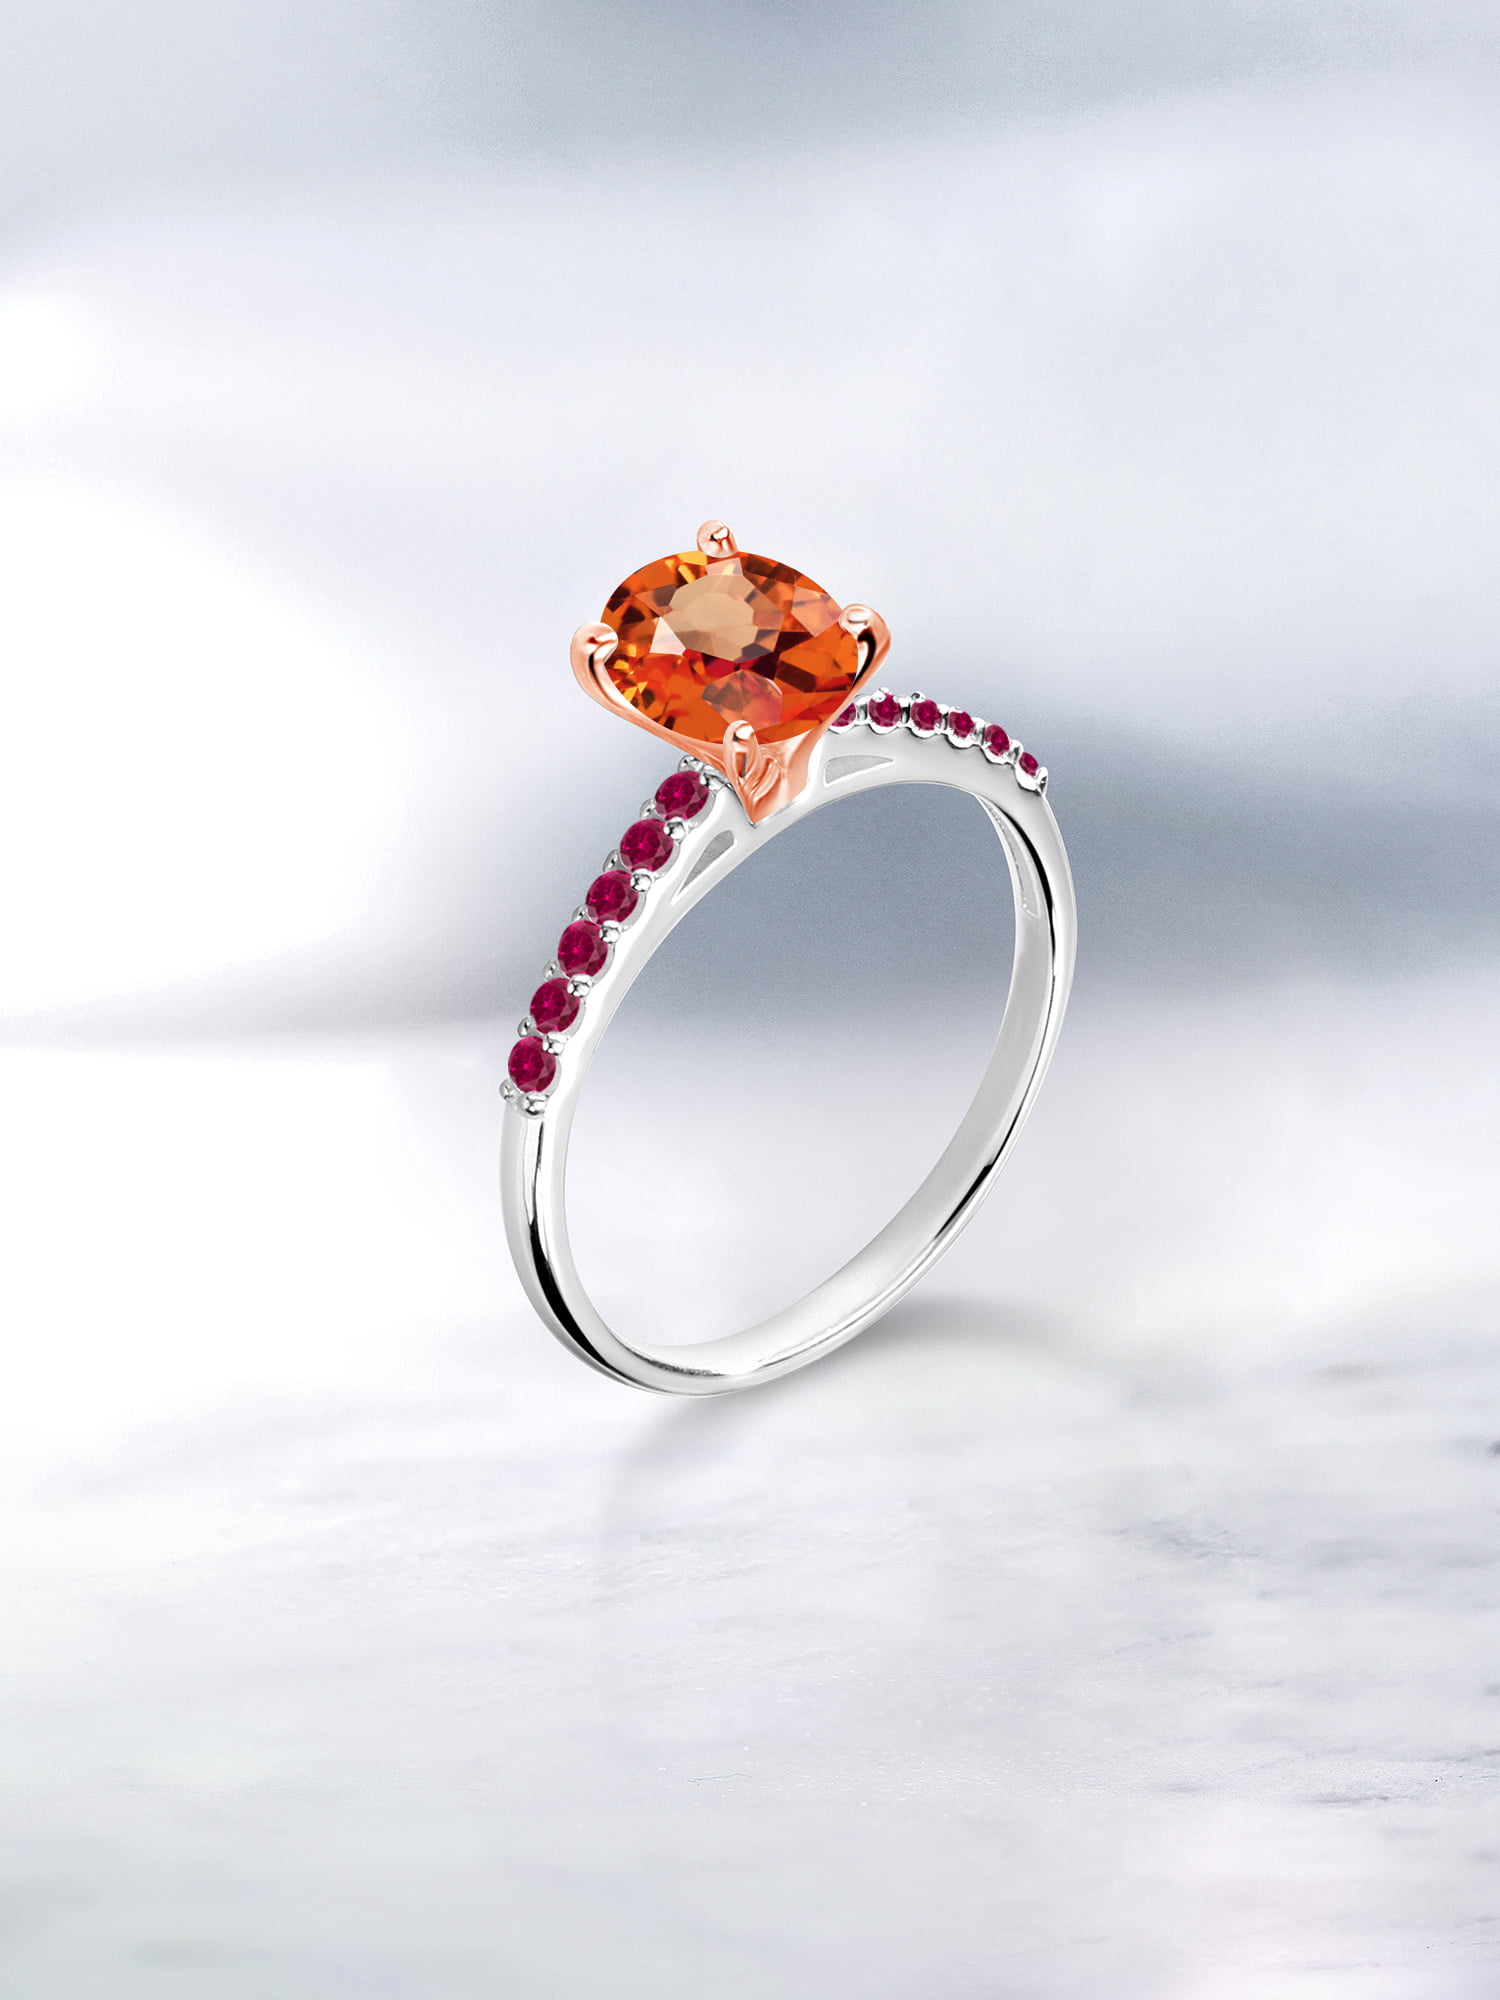 Gem Stone King 0.73 Ct Oval Orange Sapphire Red Created Ruby 925 Silver  Ring with 10K Rose Gold Prongs